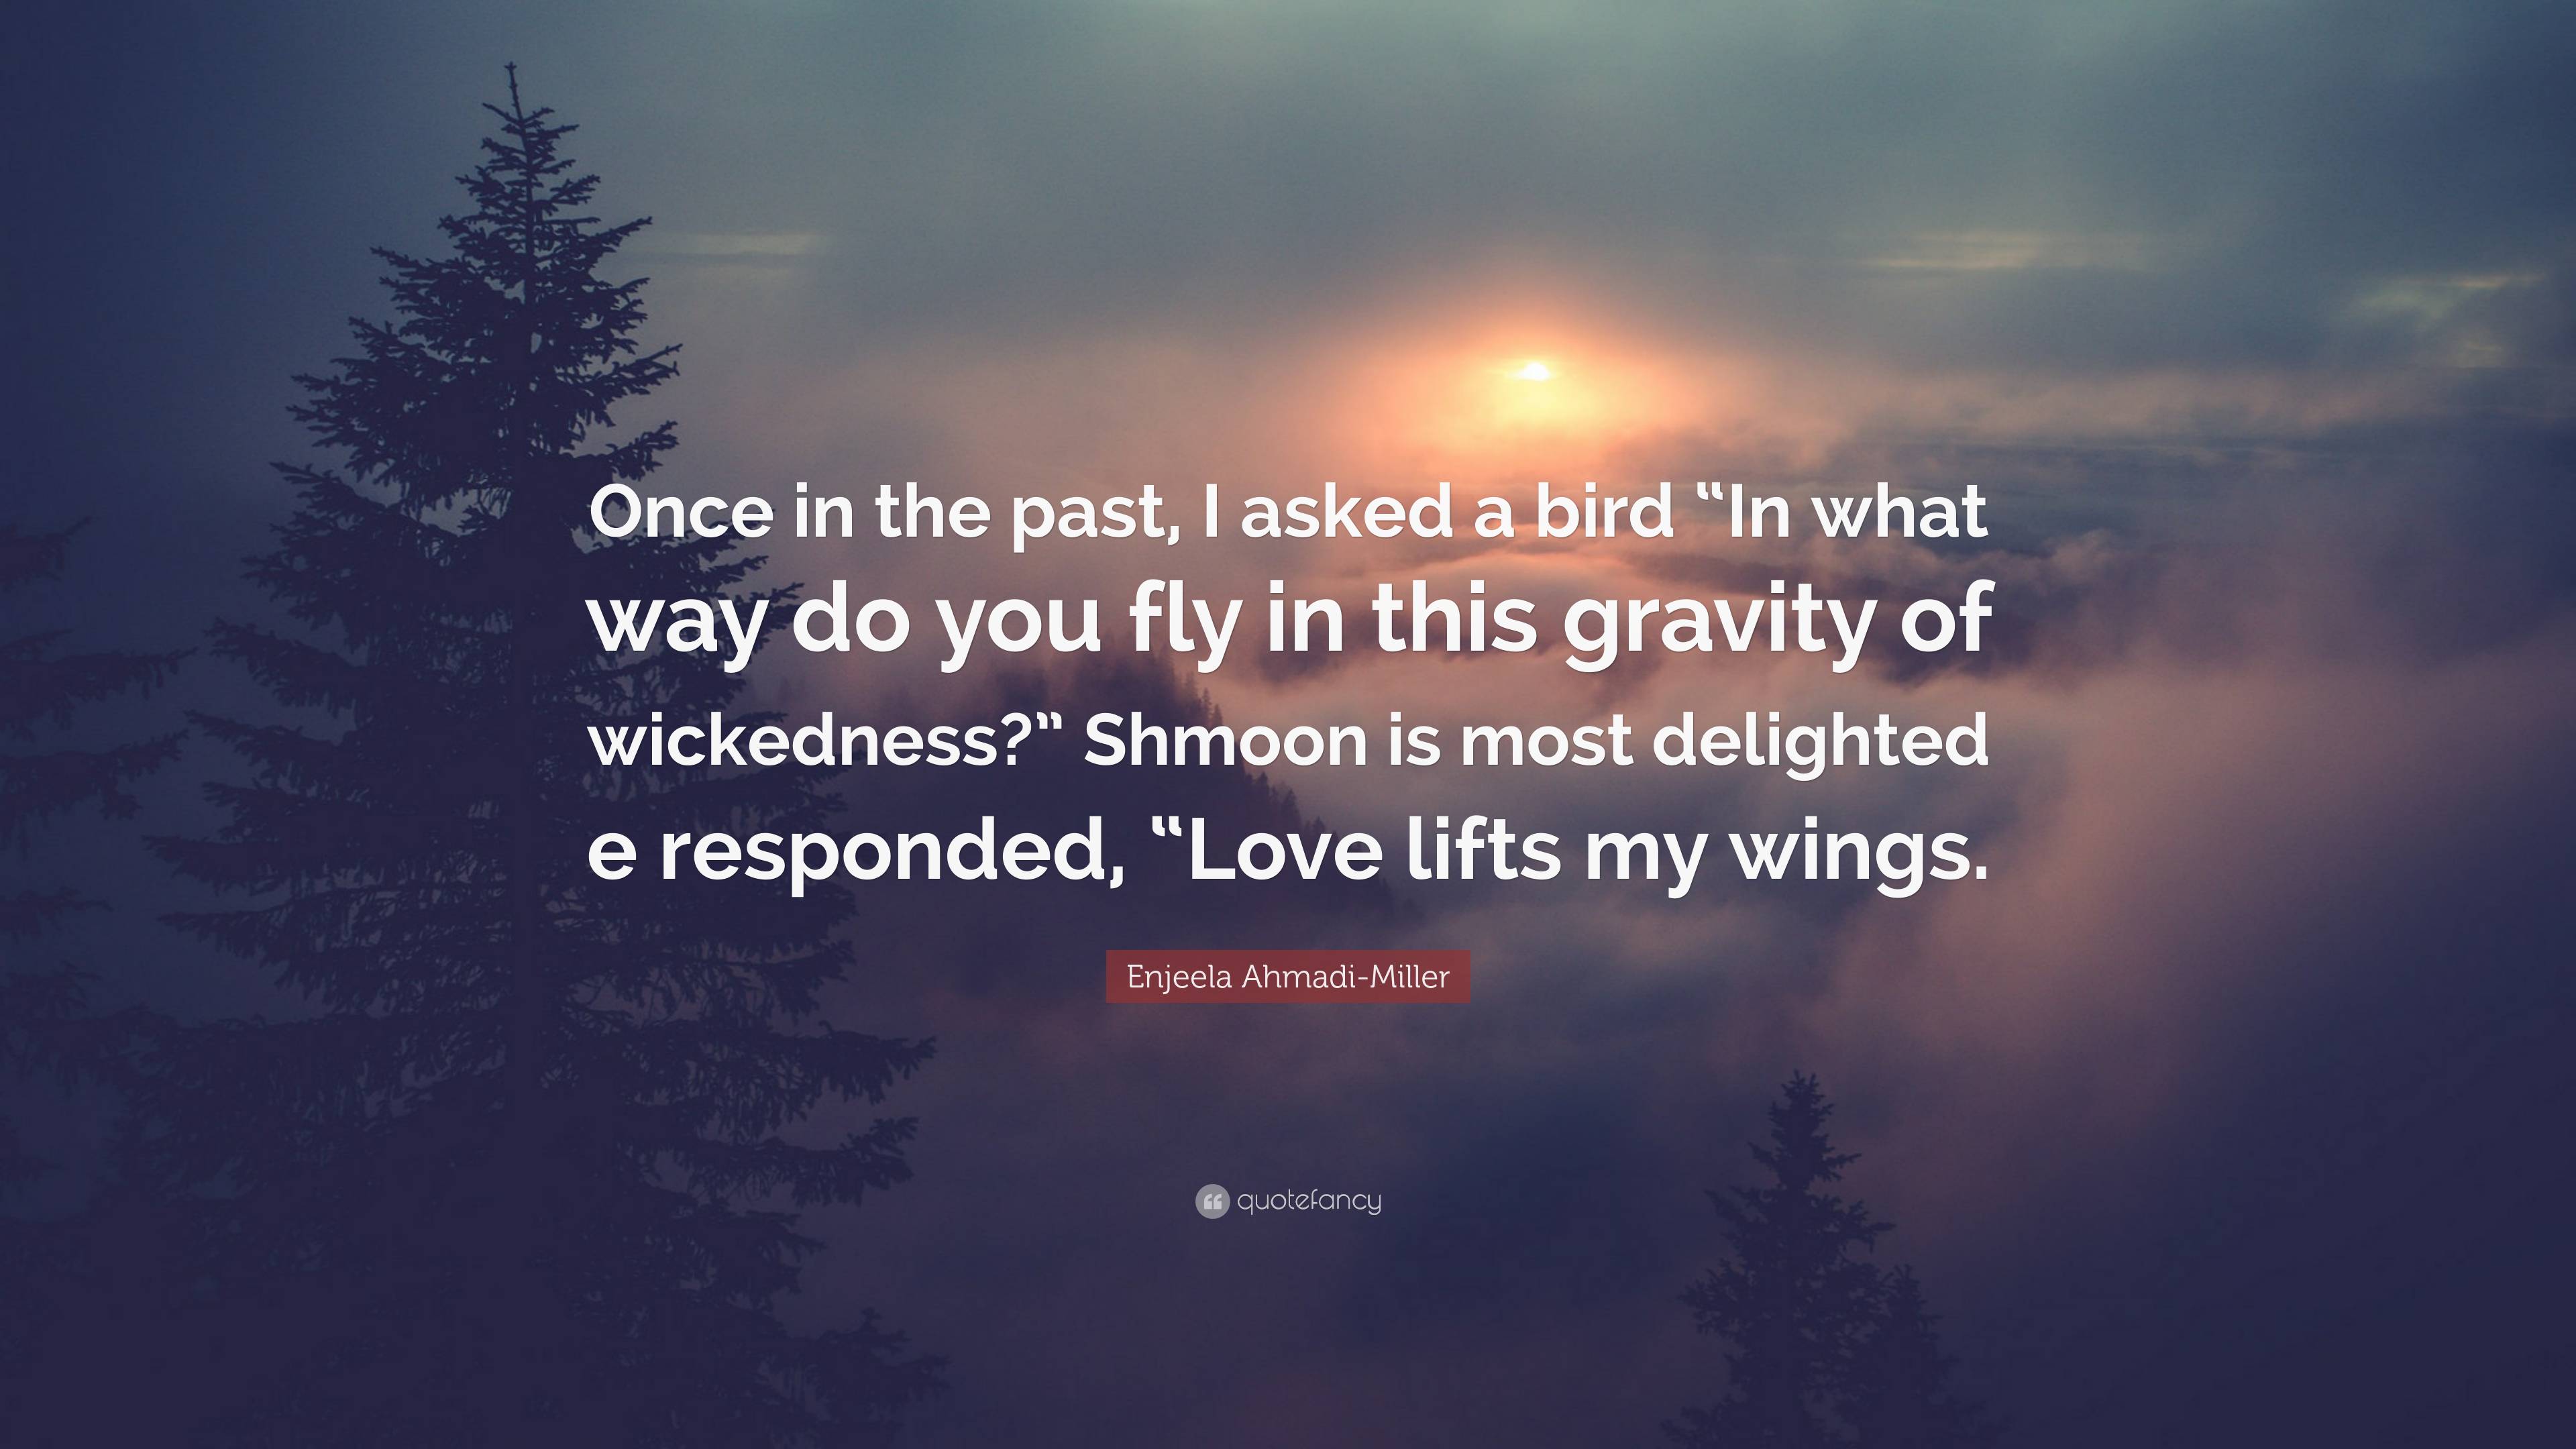 Enjeela Ahmadi-Miller Quote: “Once in the past, I asked a bird “In what ...